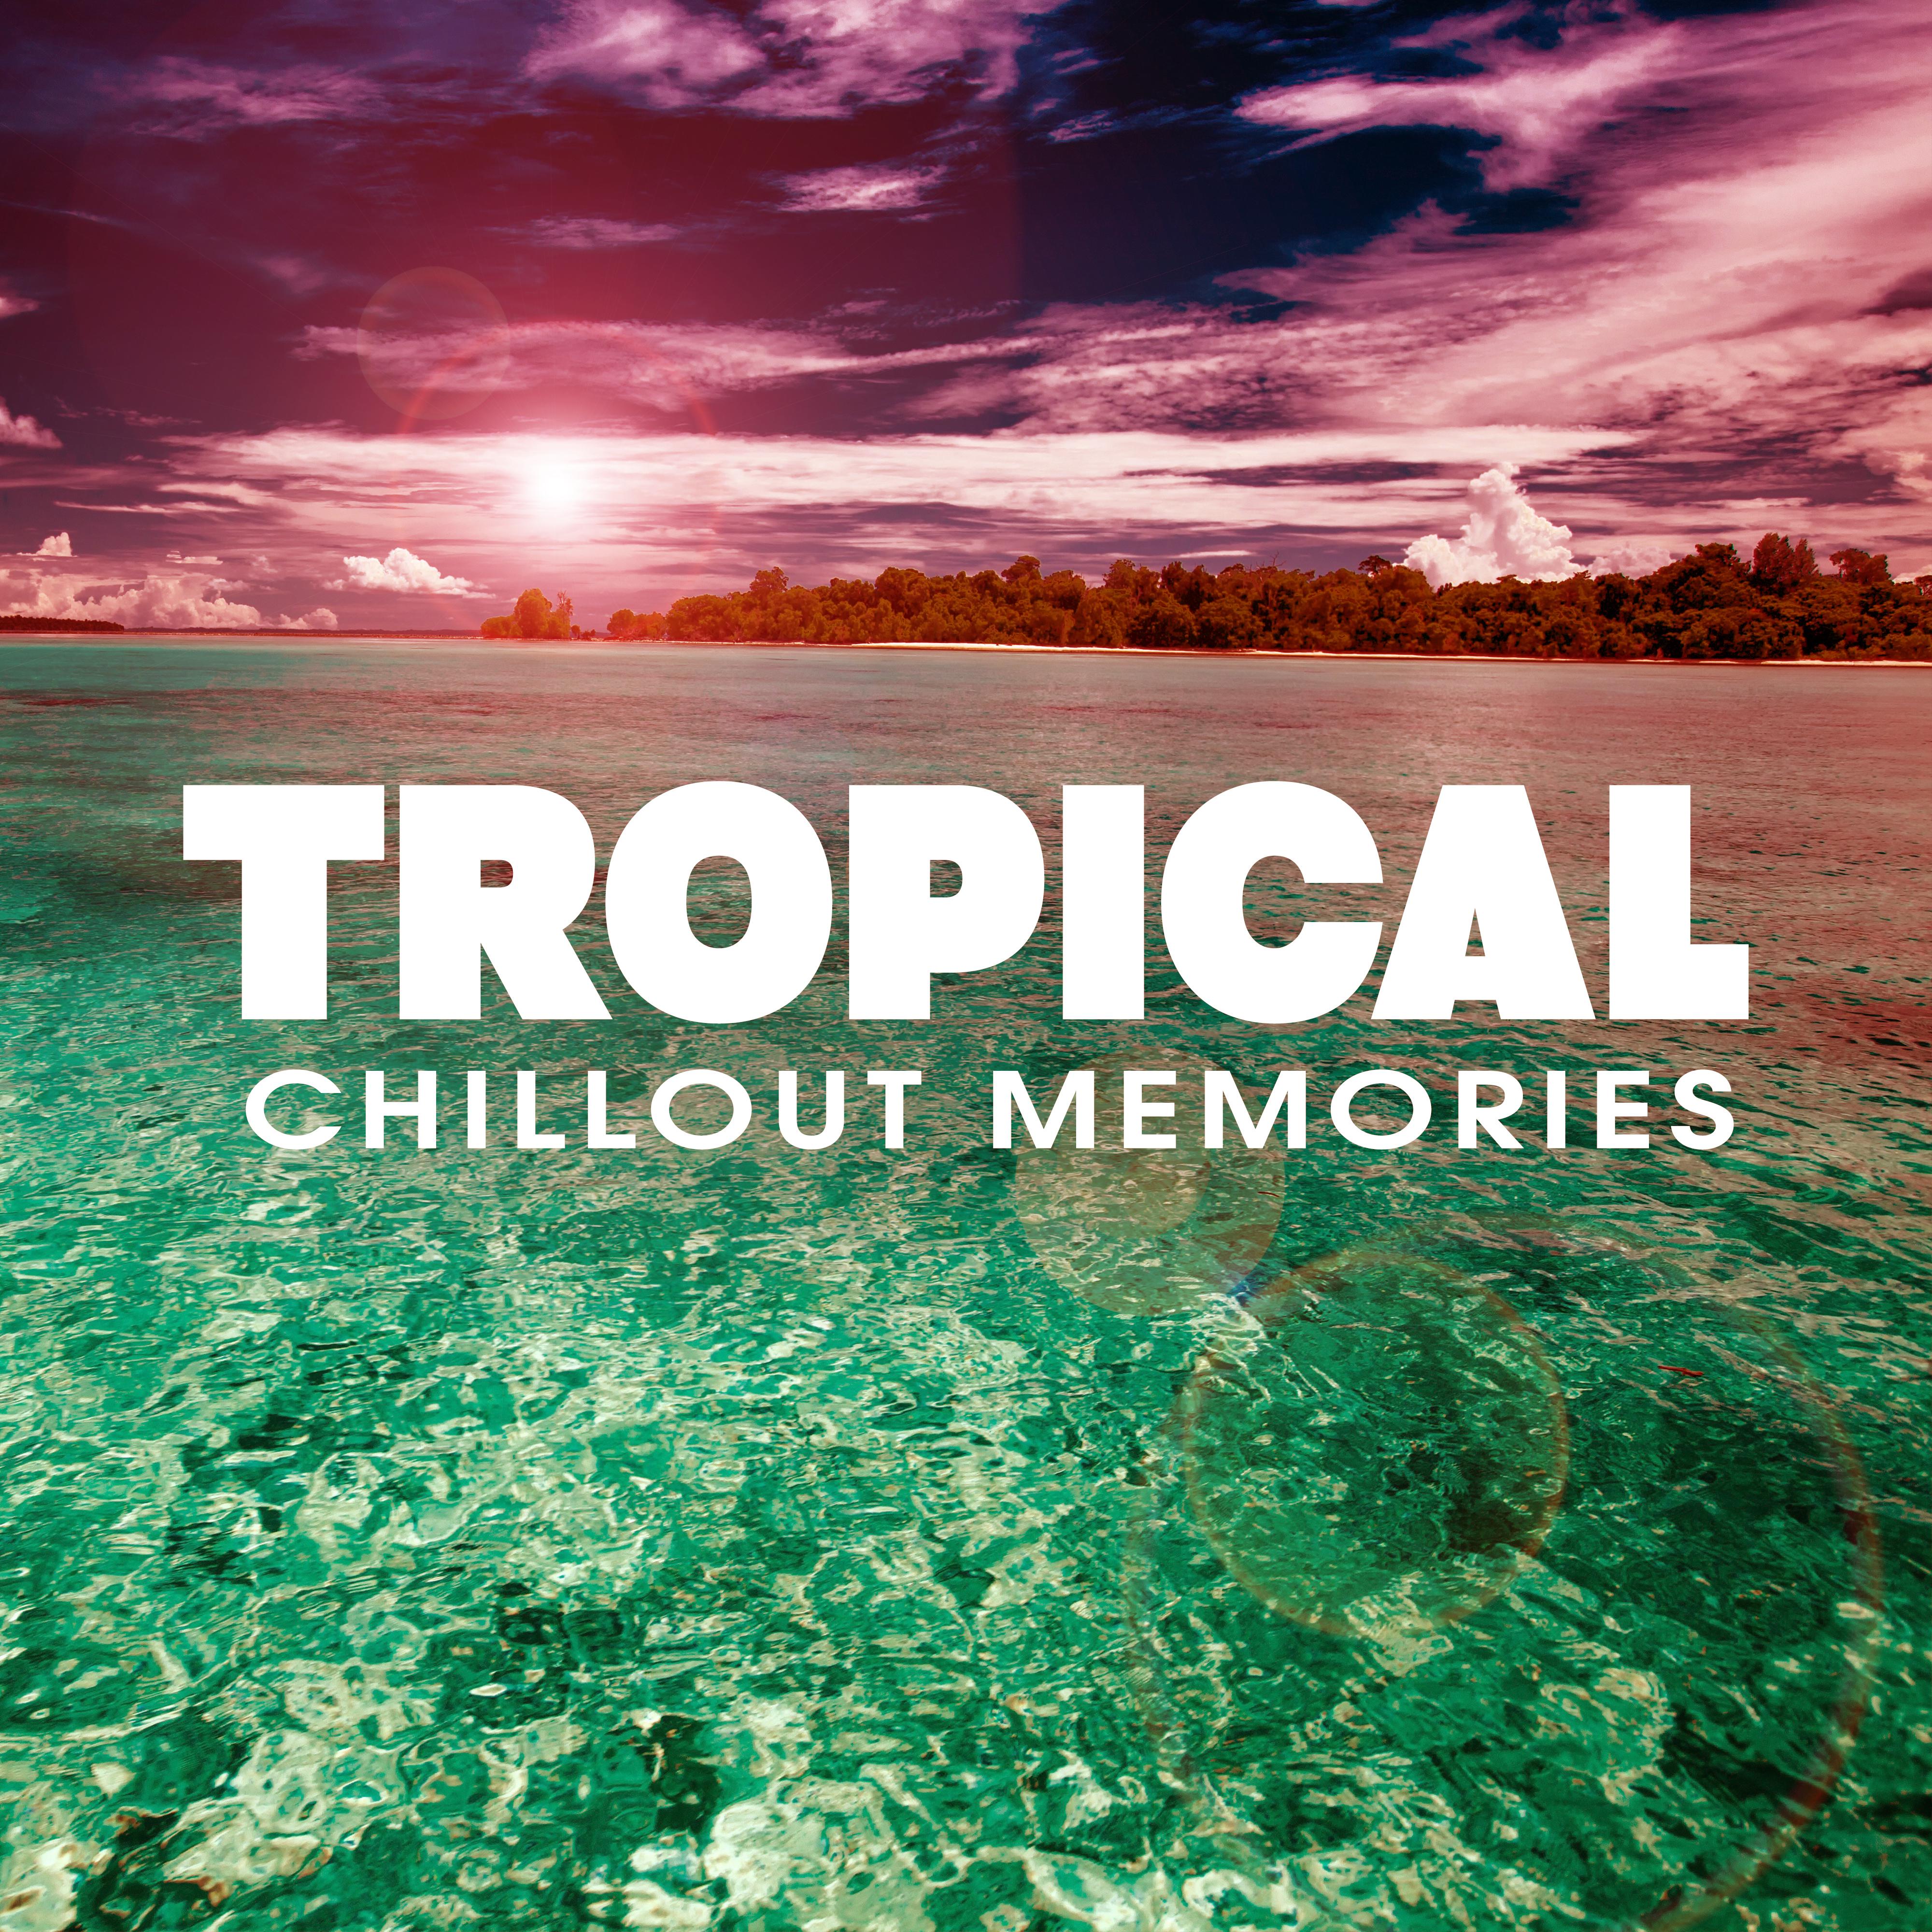 Tropical Chillout Memories – Summer Relaxation, Tropical Music, Sounds to Relax, Easy Listening